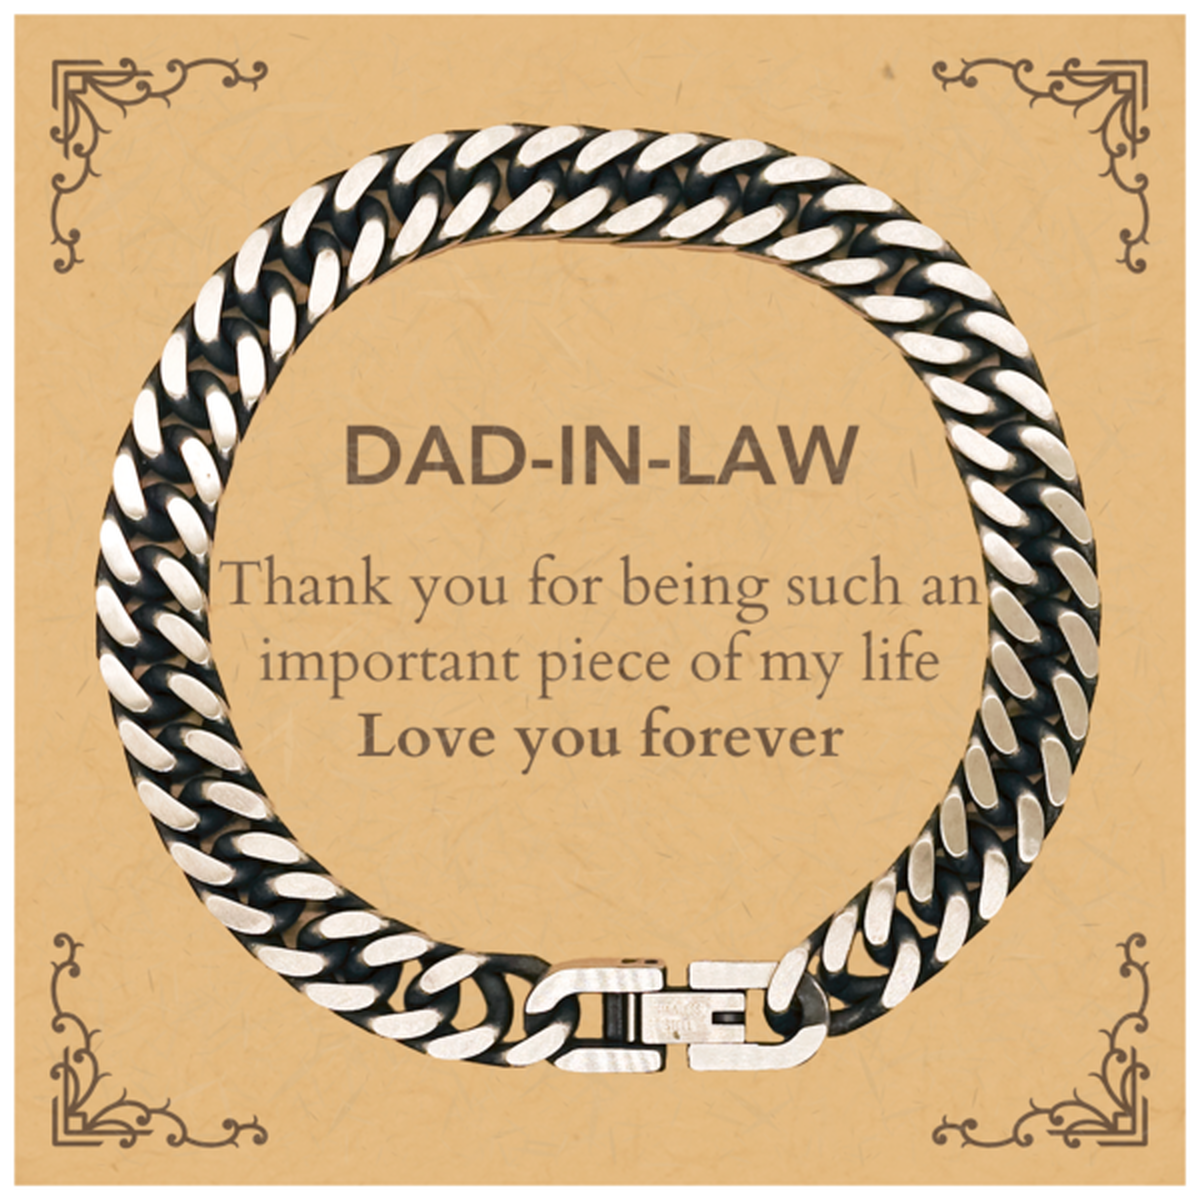 Appropriate Dad-in-law Cuban Link Chain Bracelet Epic Birthday Gifts for Dad-in-law Thank you for being such an important piece of my life Dad-in-law Christmas Mothers Fathers Day